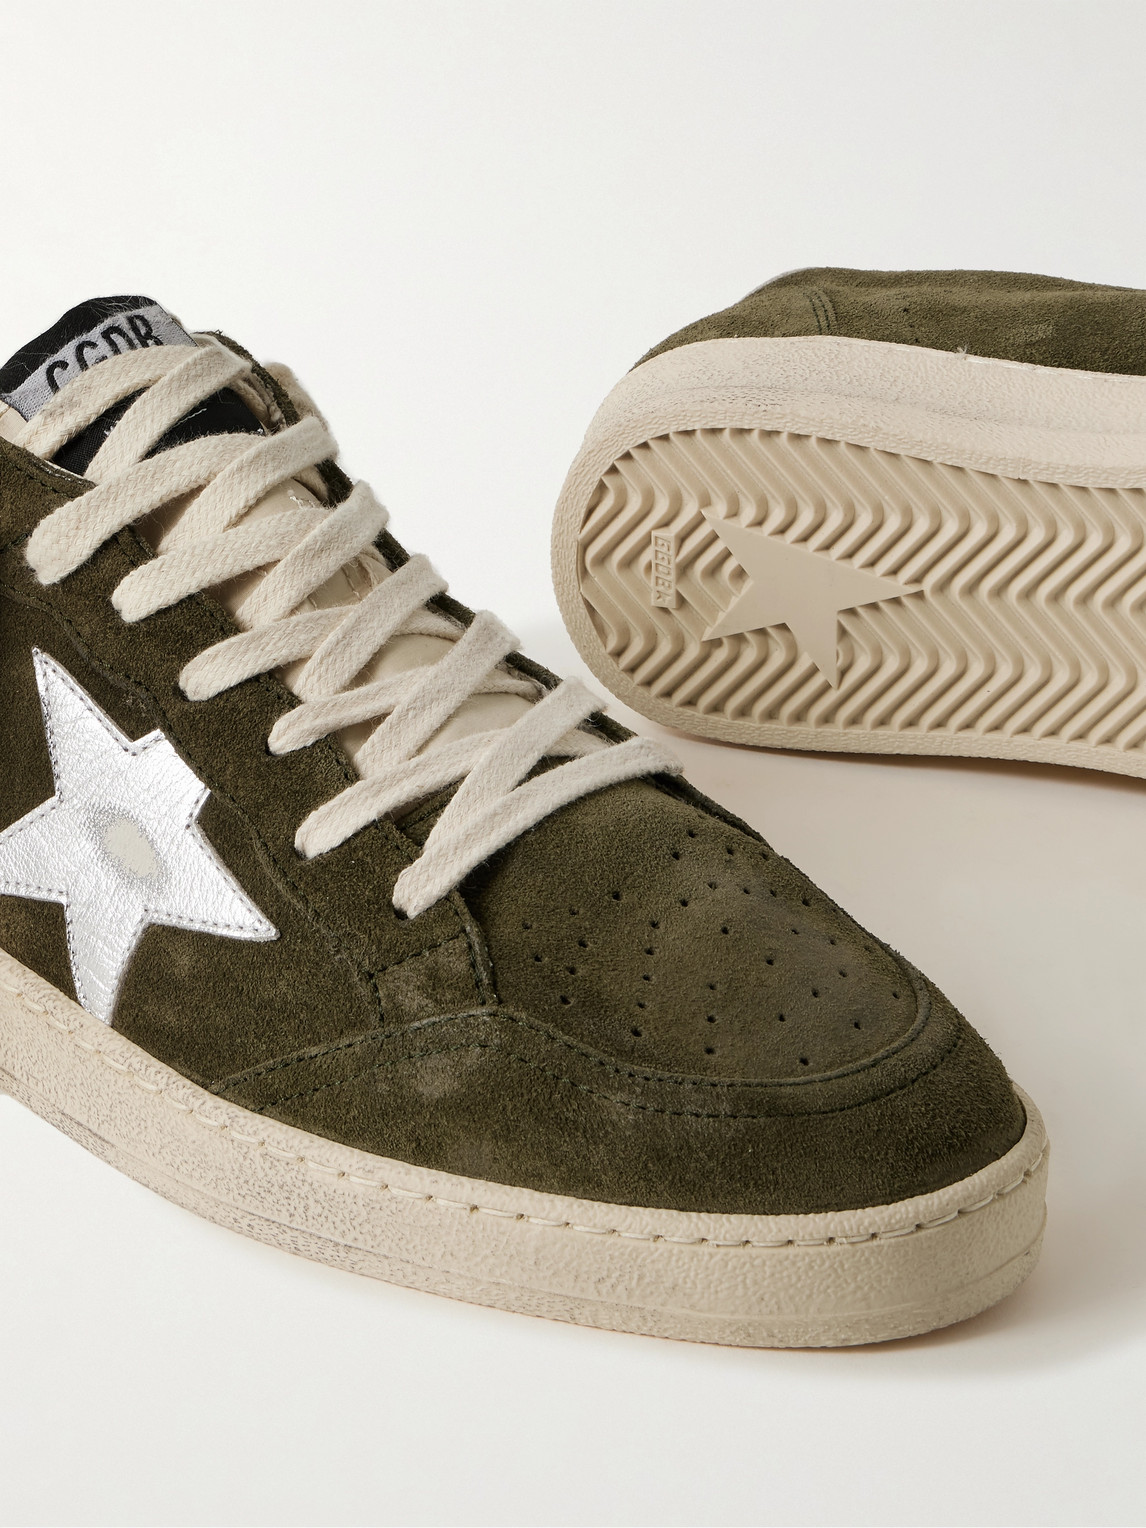 Shop Golden Goose Ball Star Distressed Leather-trimmed Suede Sneakers In Green